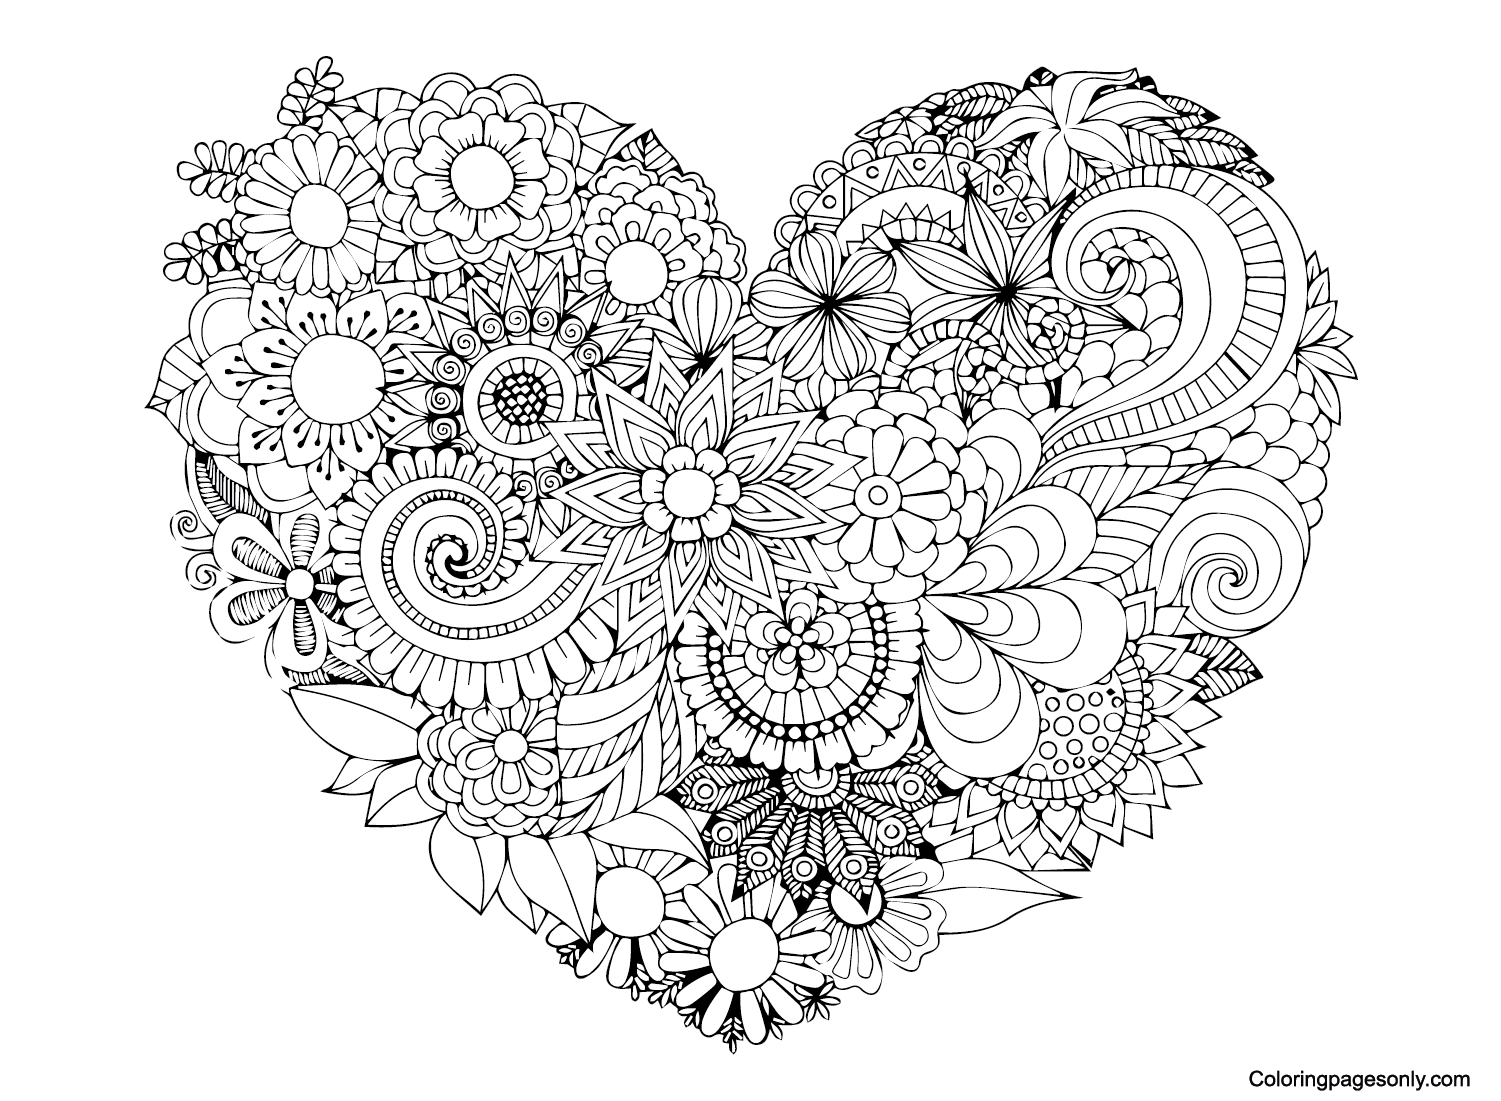 Mindfulness Images Coloring Pages